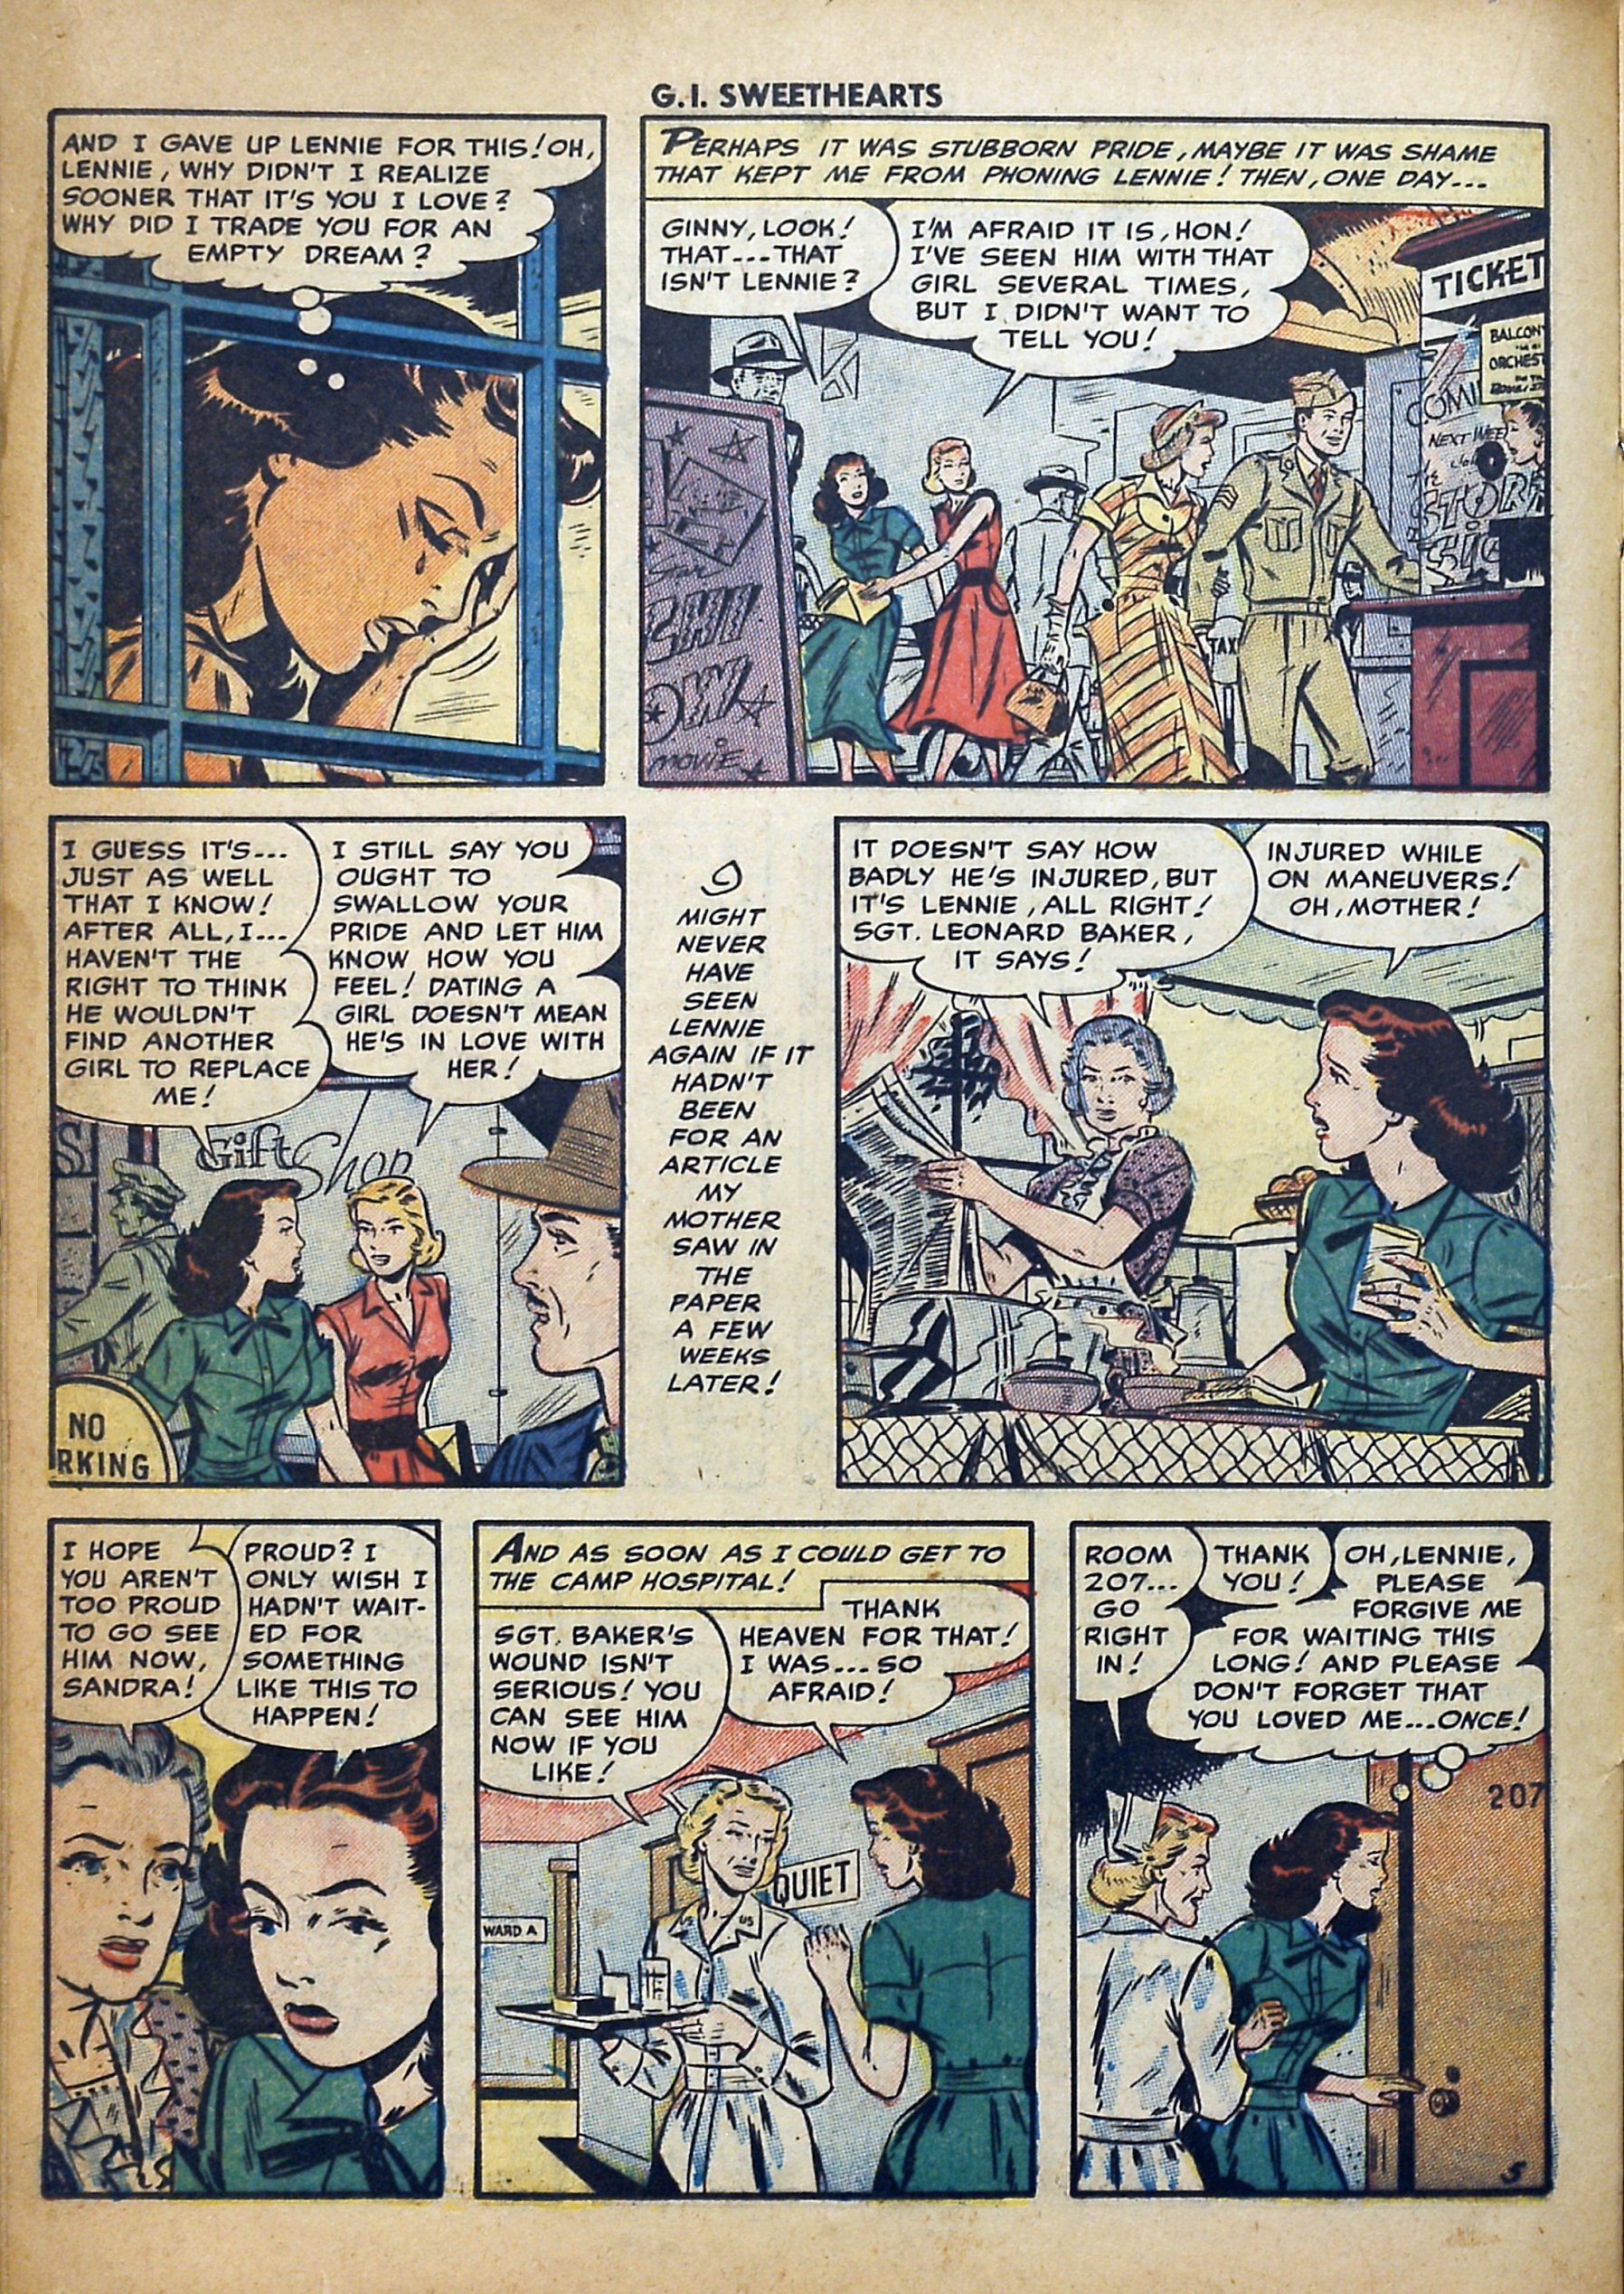 Read online G.I. Sweethearts comic -  Issue #43 - 16